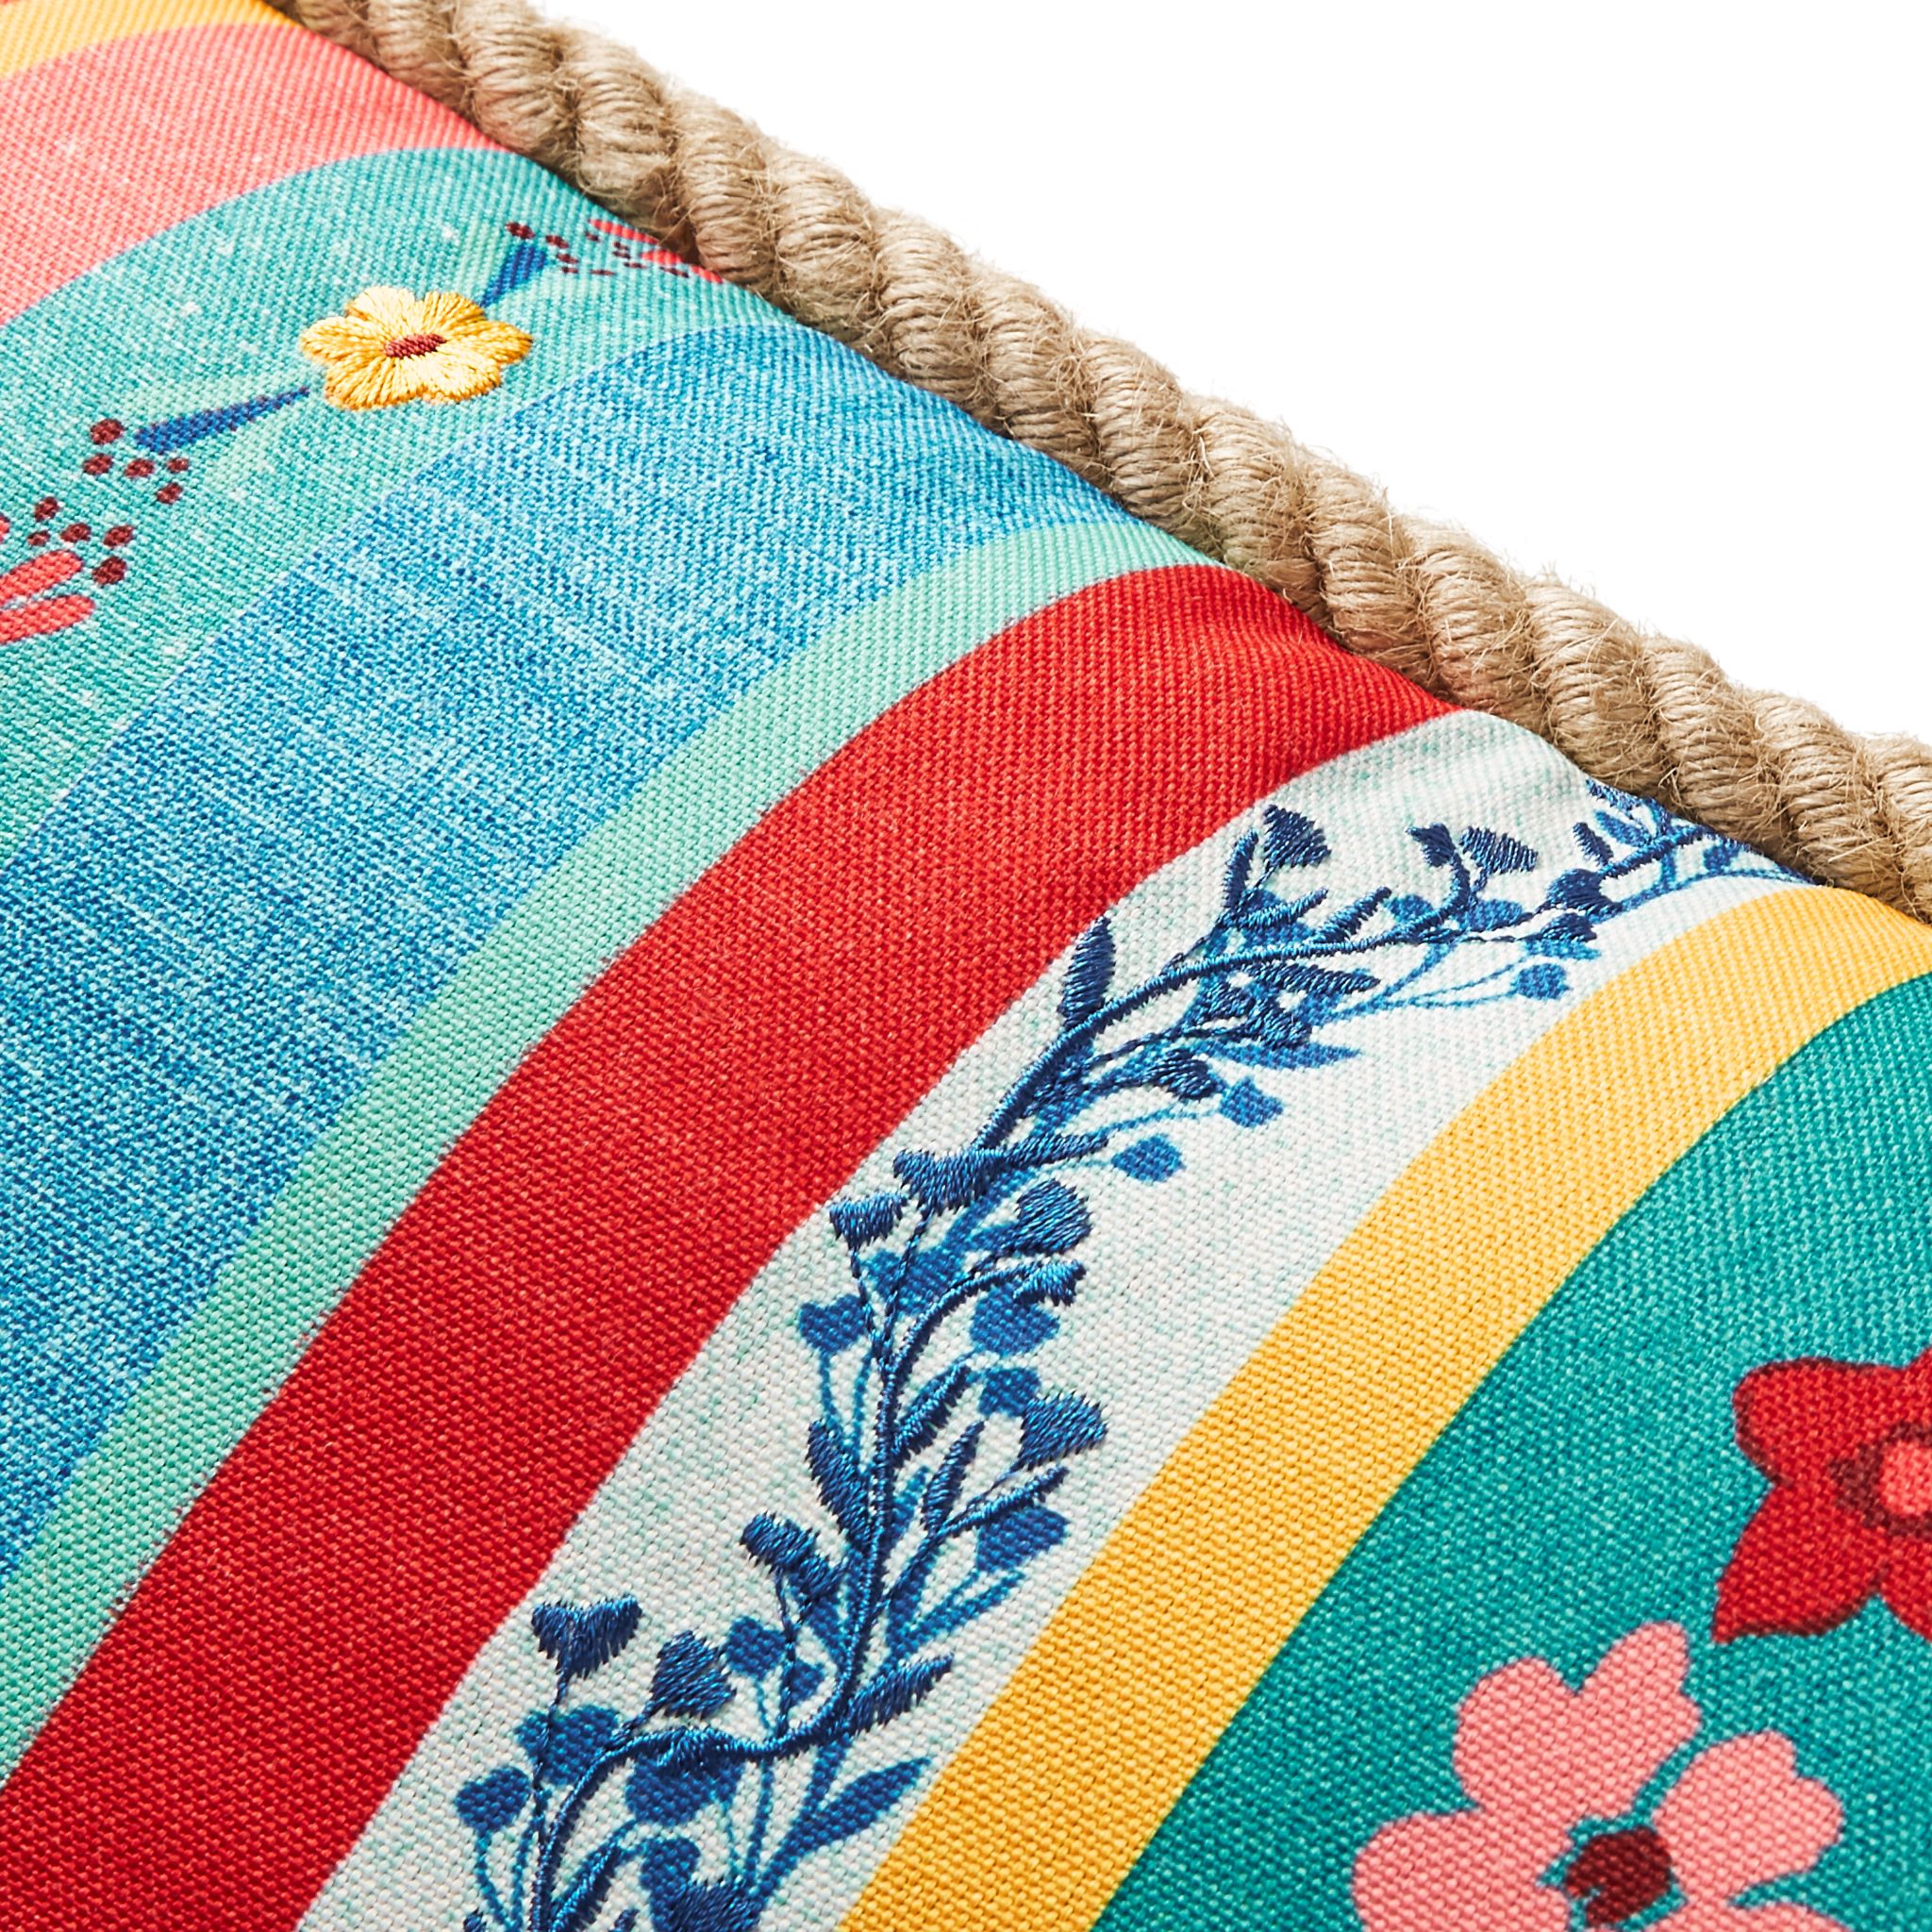 The Pioneer Woman Floral Stripe Outdoor Pillow, 14" x 20", Multicolor - image 4 of 8